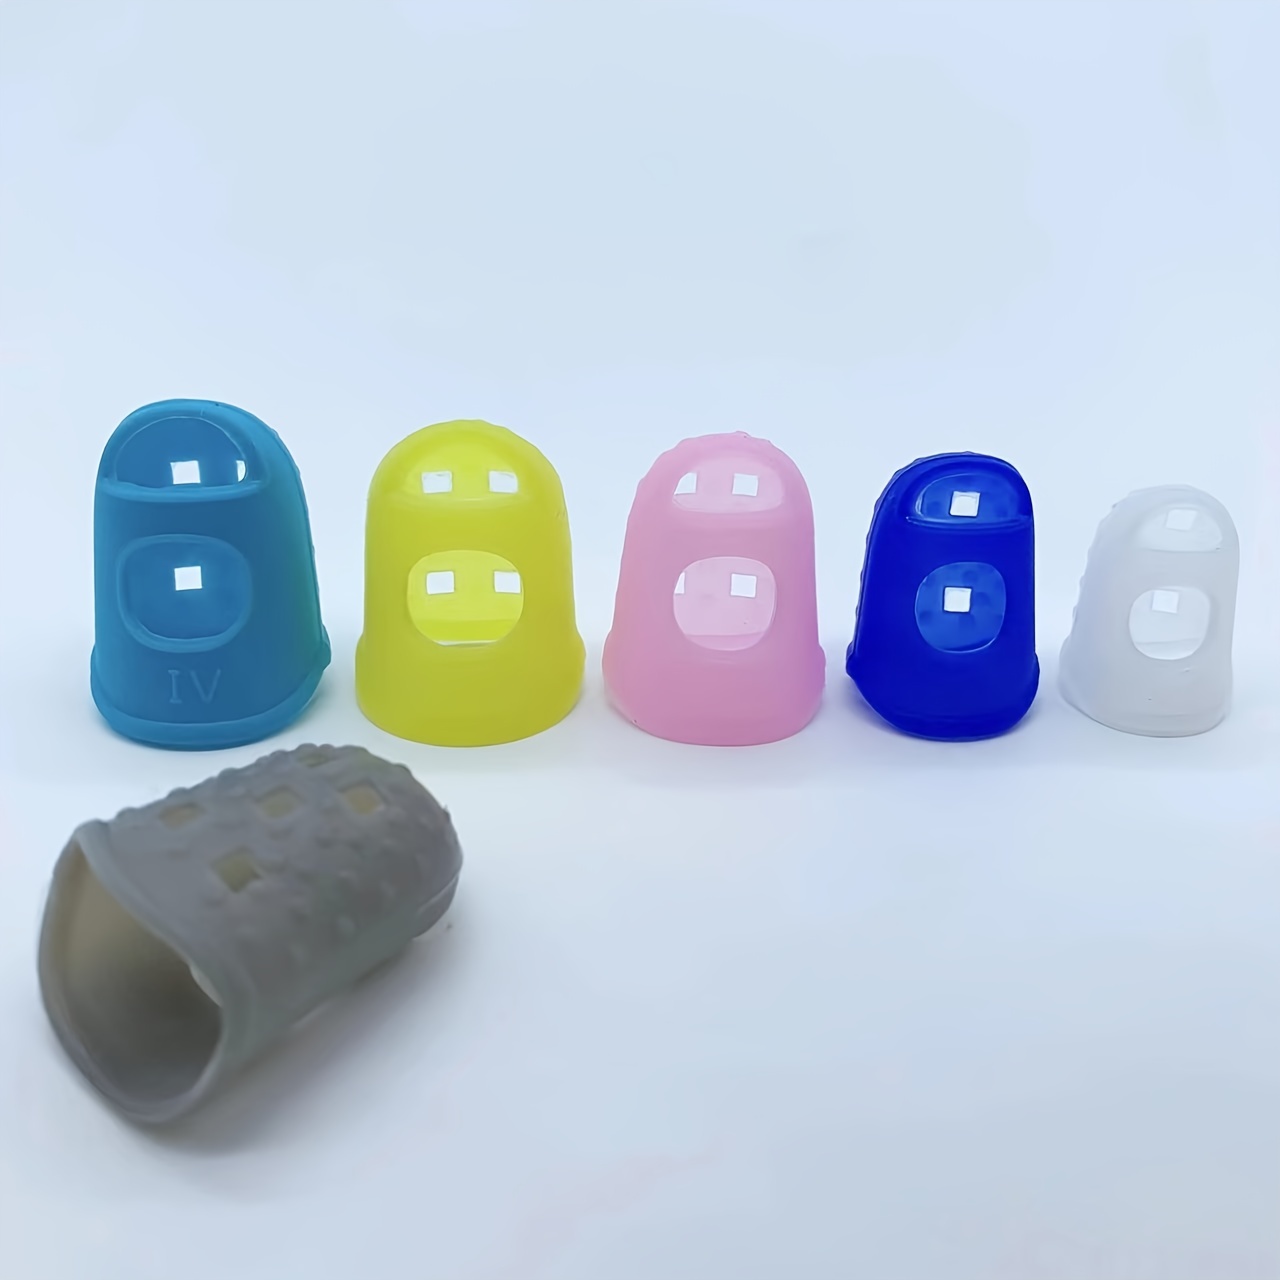 10pcs Rubber Finger Tips Office Rubber Thimbles Silicone Thimble Gripper  Thick Reusable Finger Protector Fingertip With A Box For Money Counting  Colla